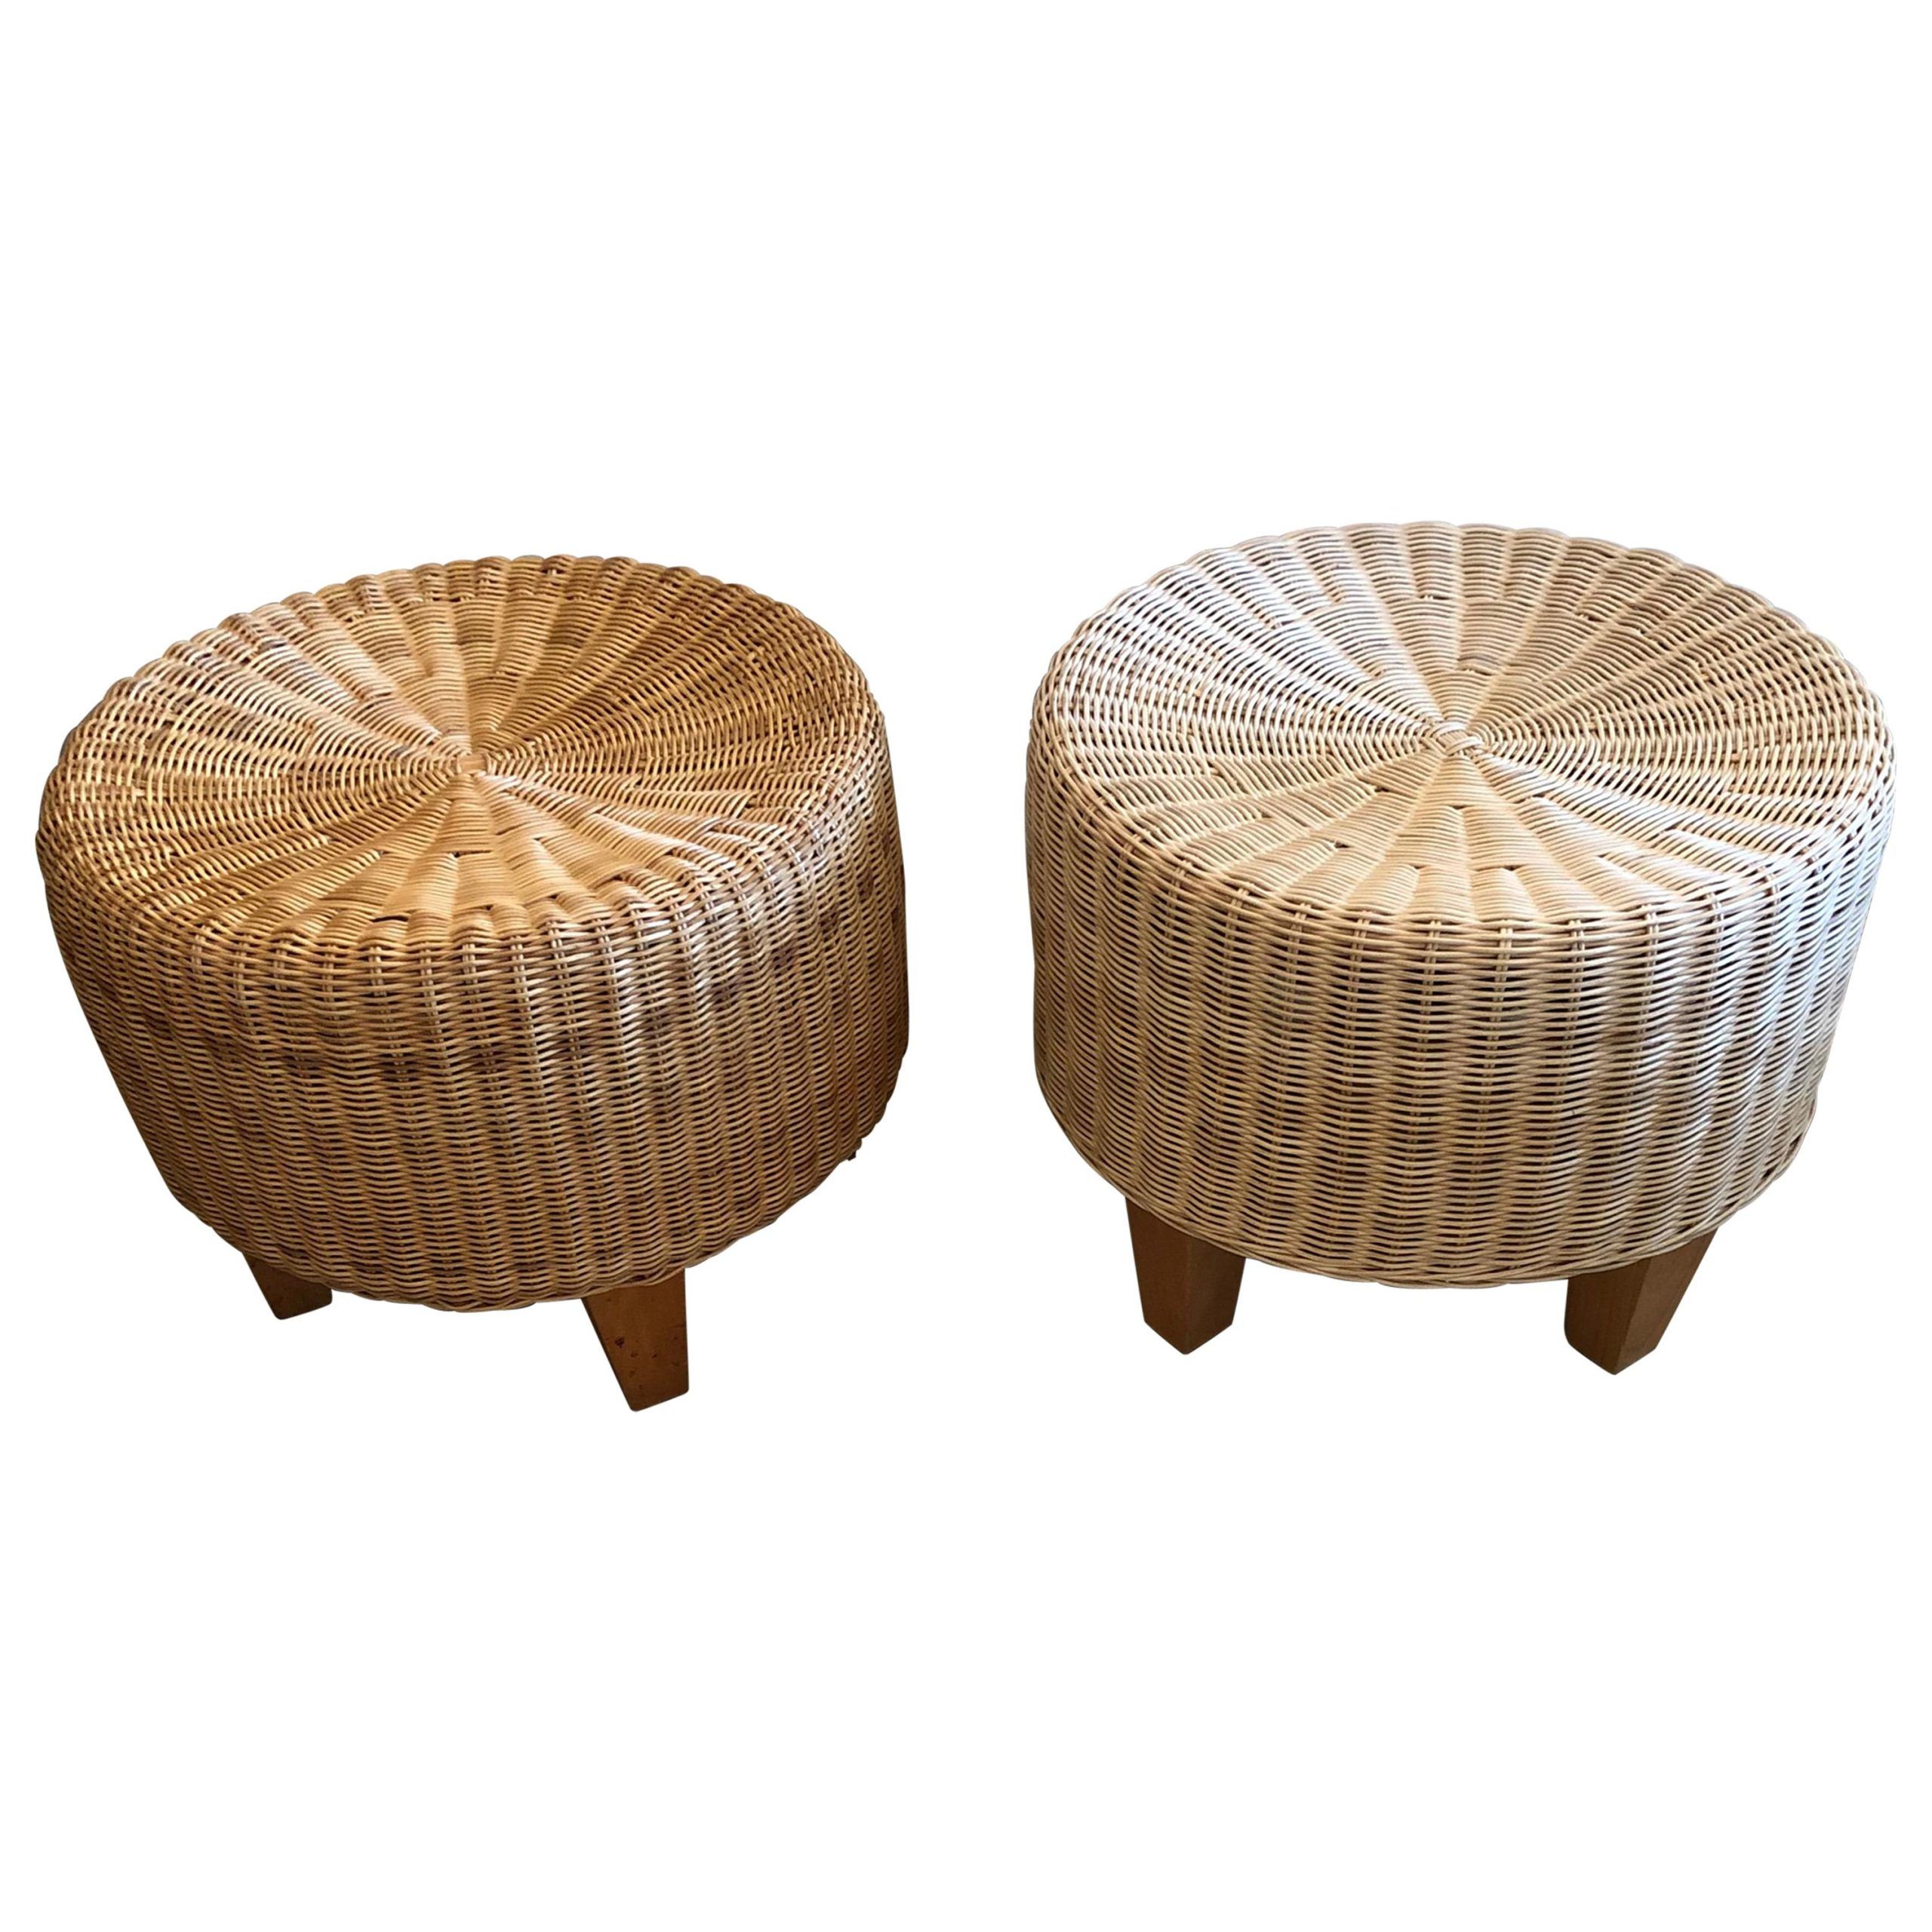 East Hampton Pair Of Woven Rattan Round Ottomans At 1stdibs Intended For Rattan Ottomans (View 6 of 15)